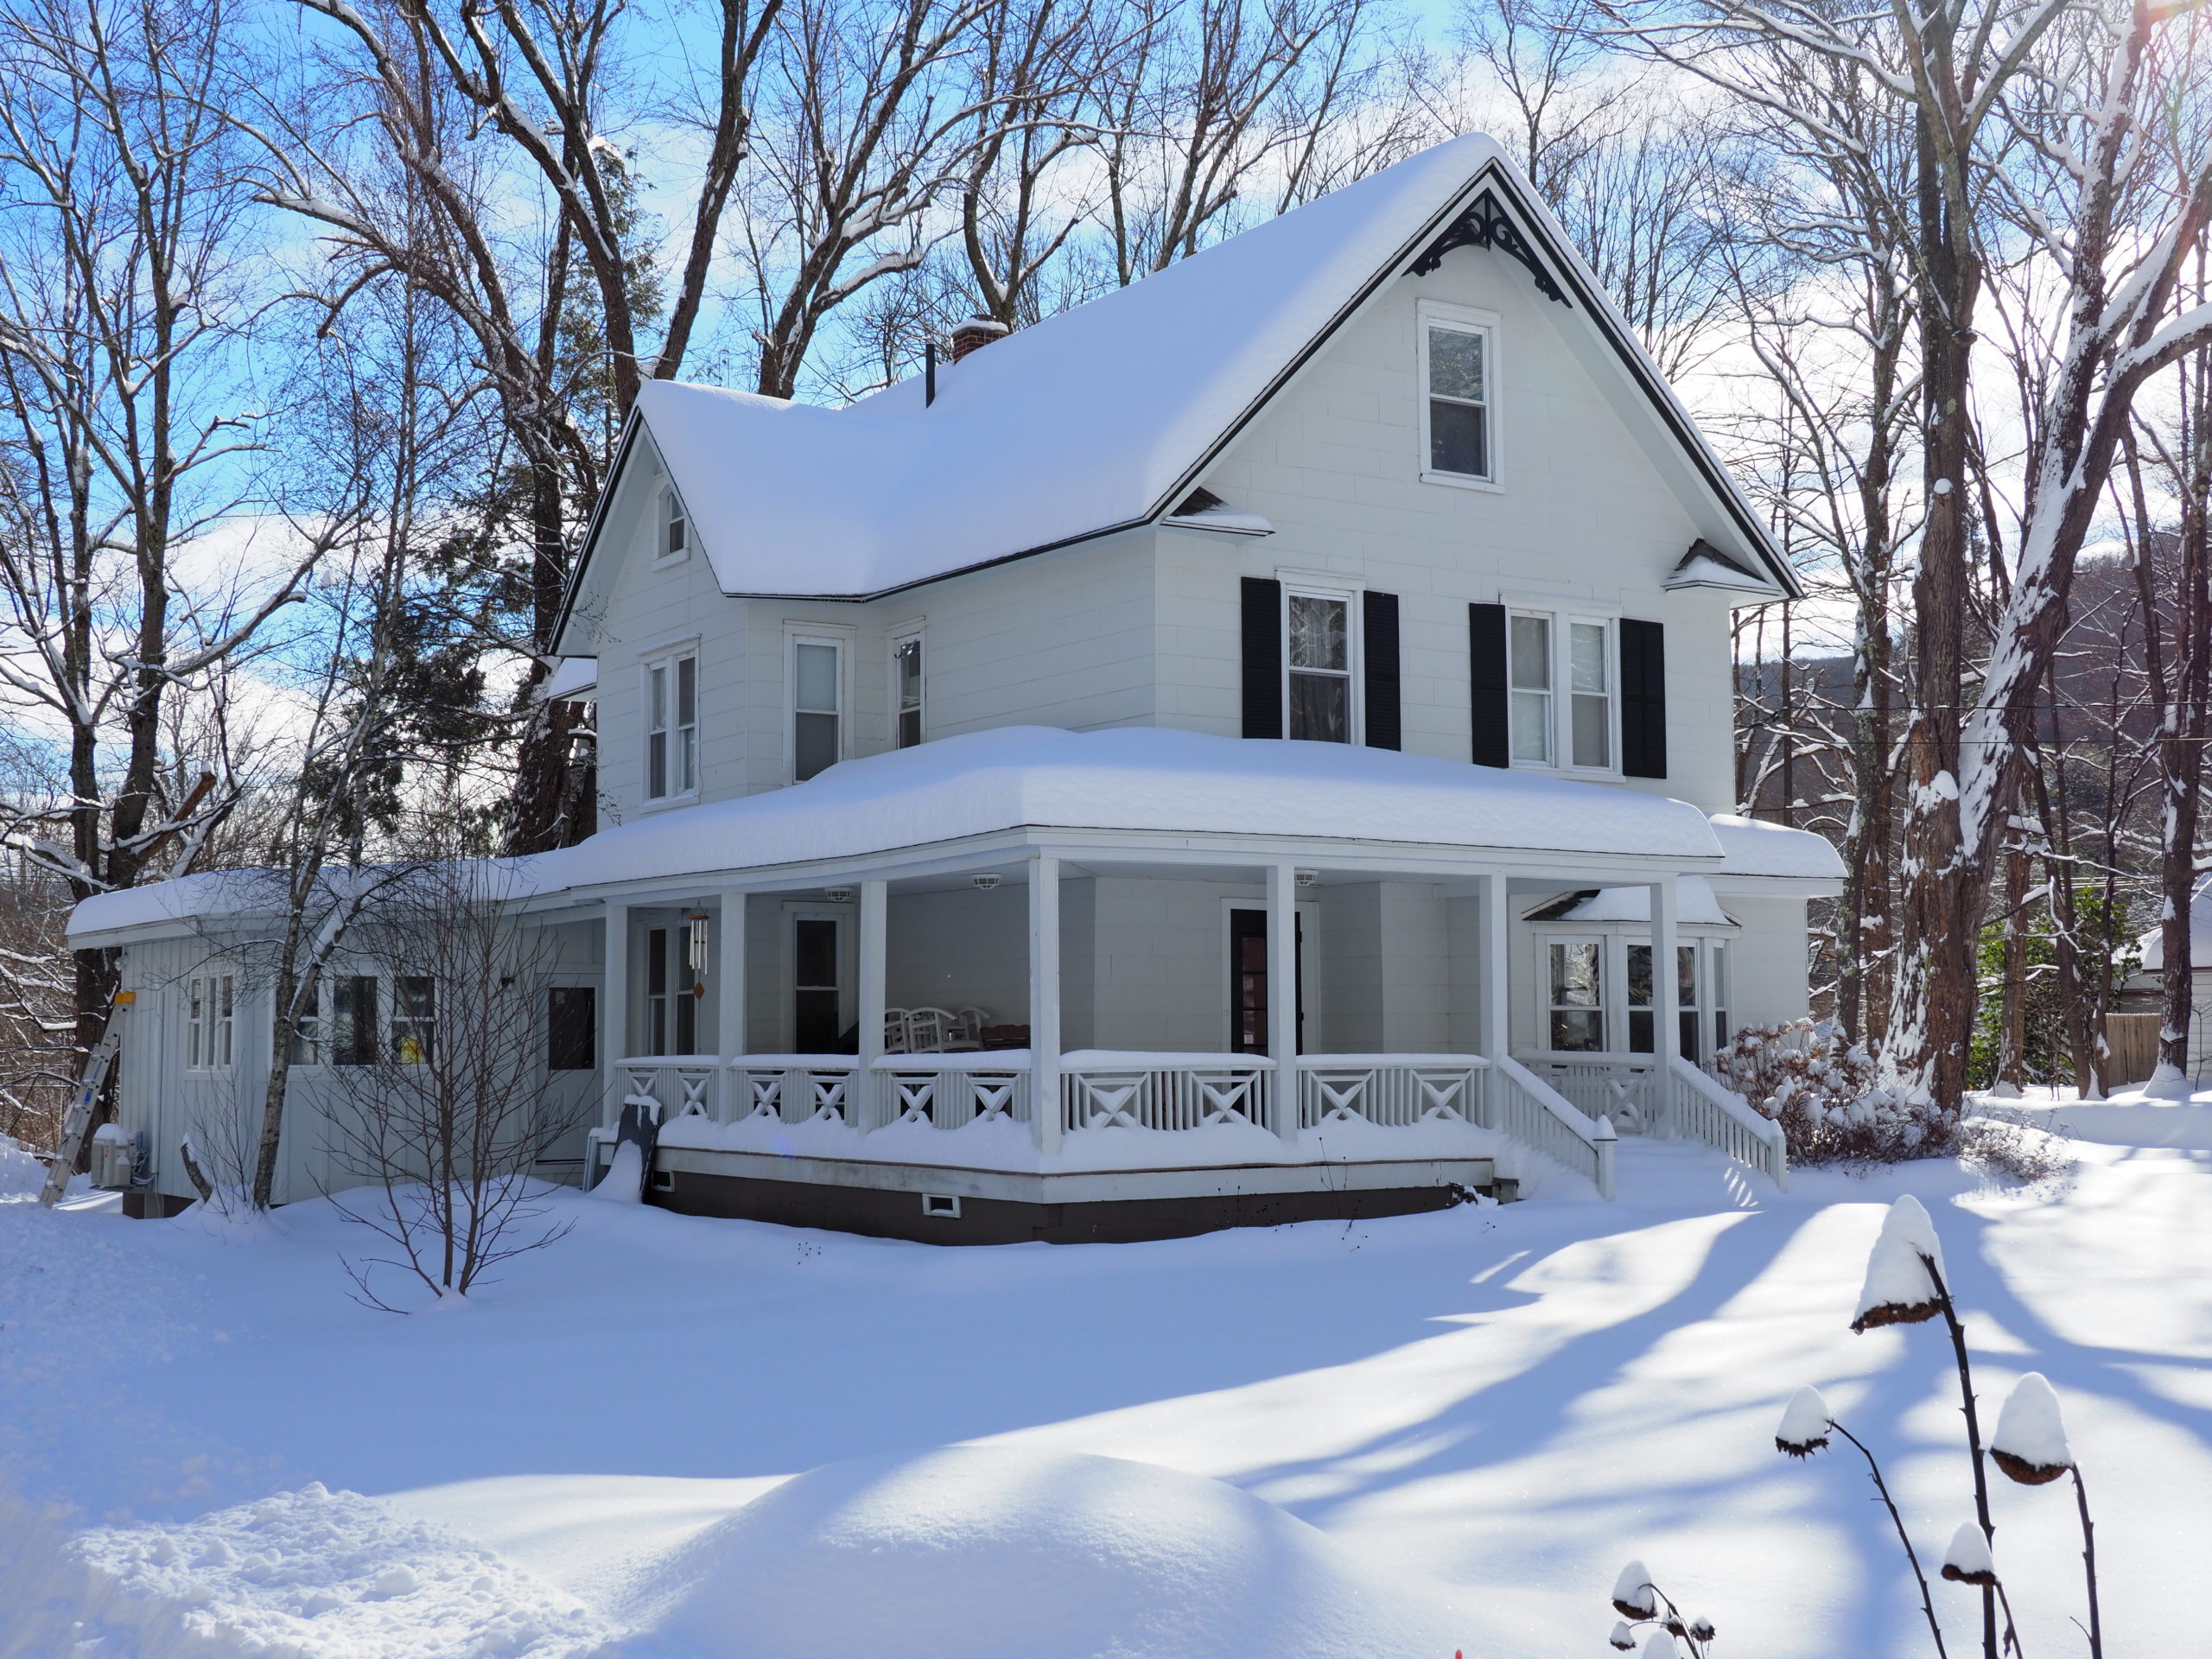 The Hampton Gardener’s winter hibernation retreat. Buried under 20 inches of snow are the perennial beds surrounding the house. And doesn’t the lawn look great? No weeds.